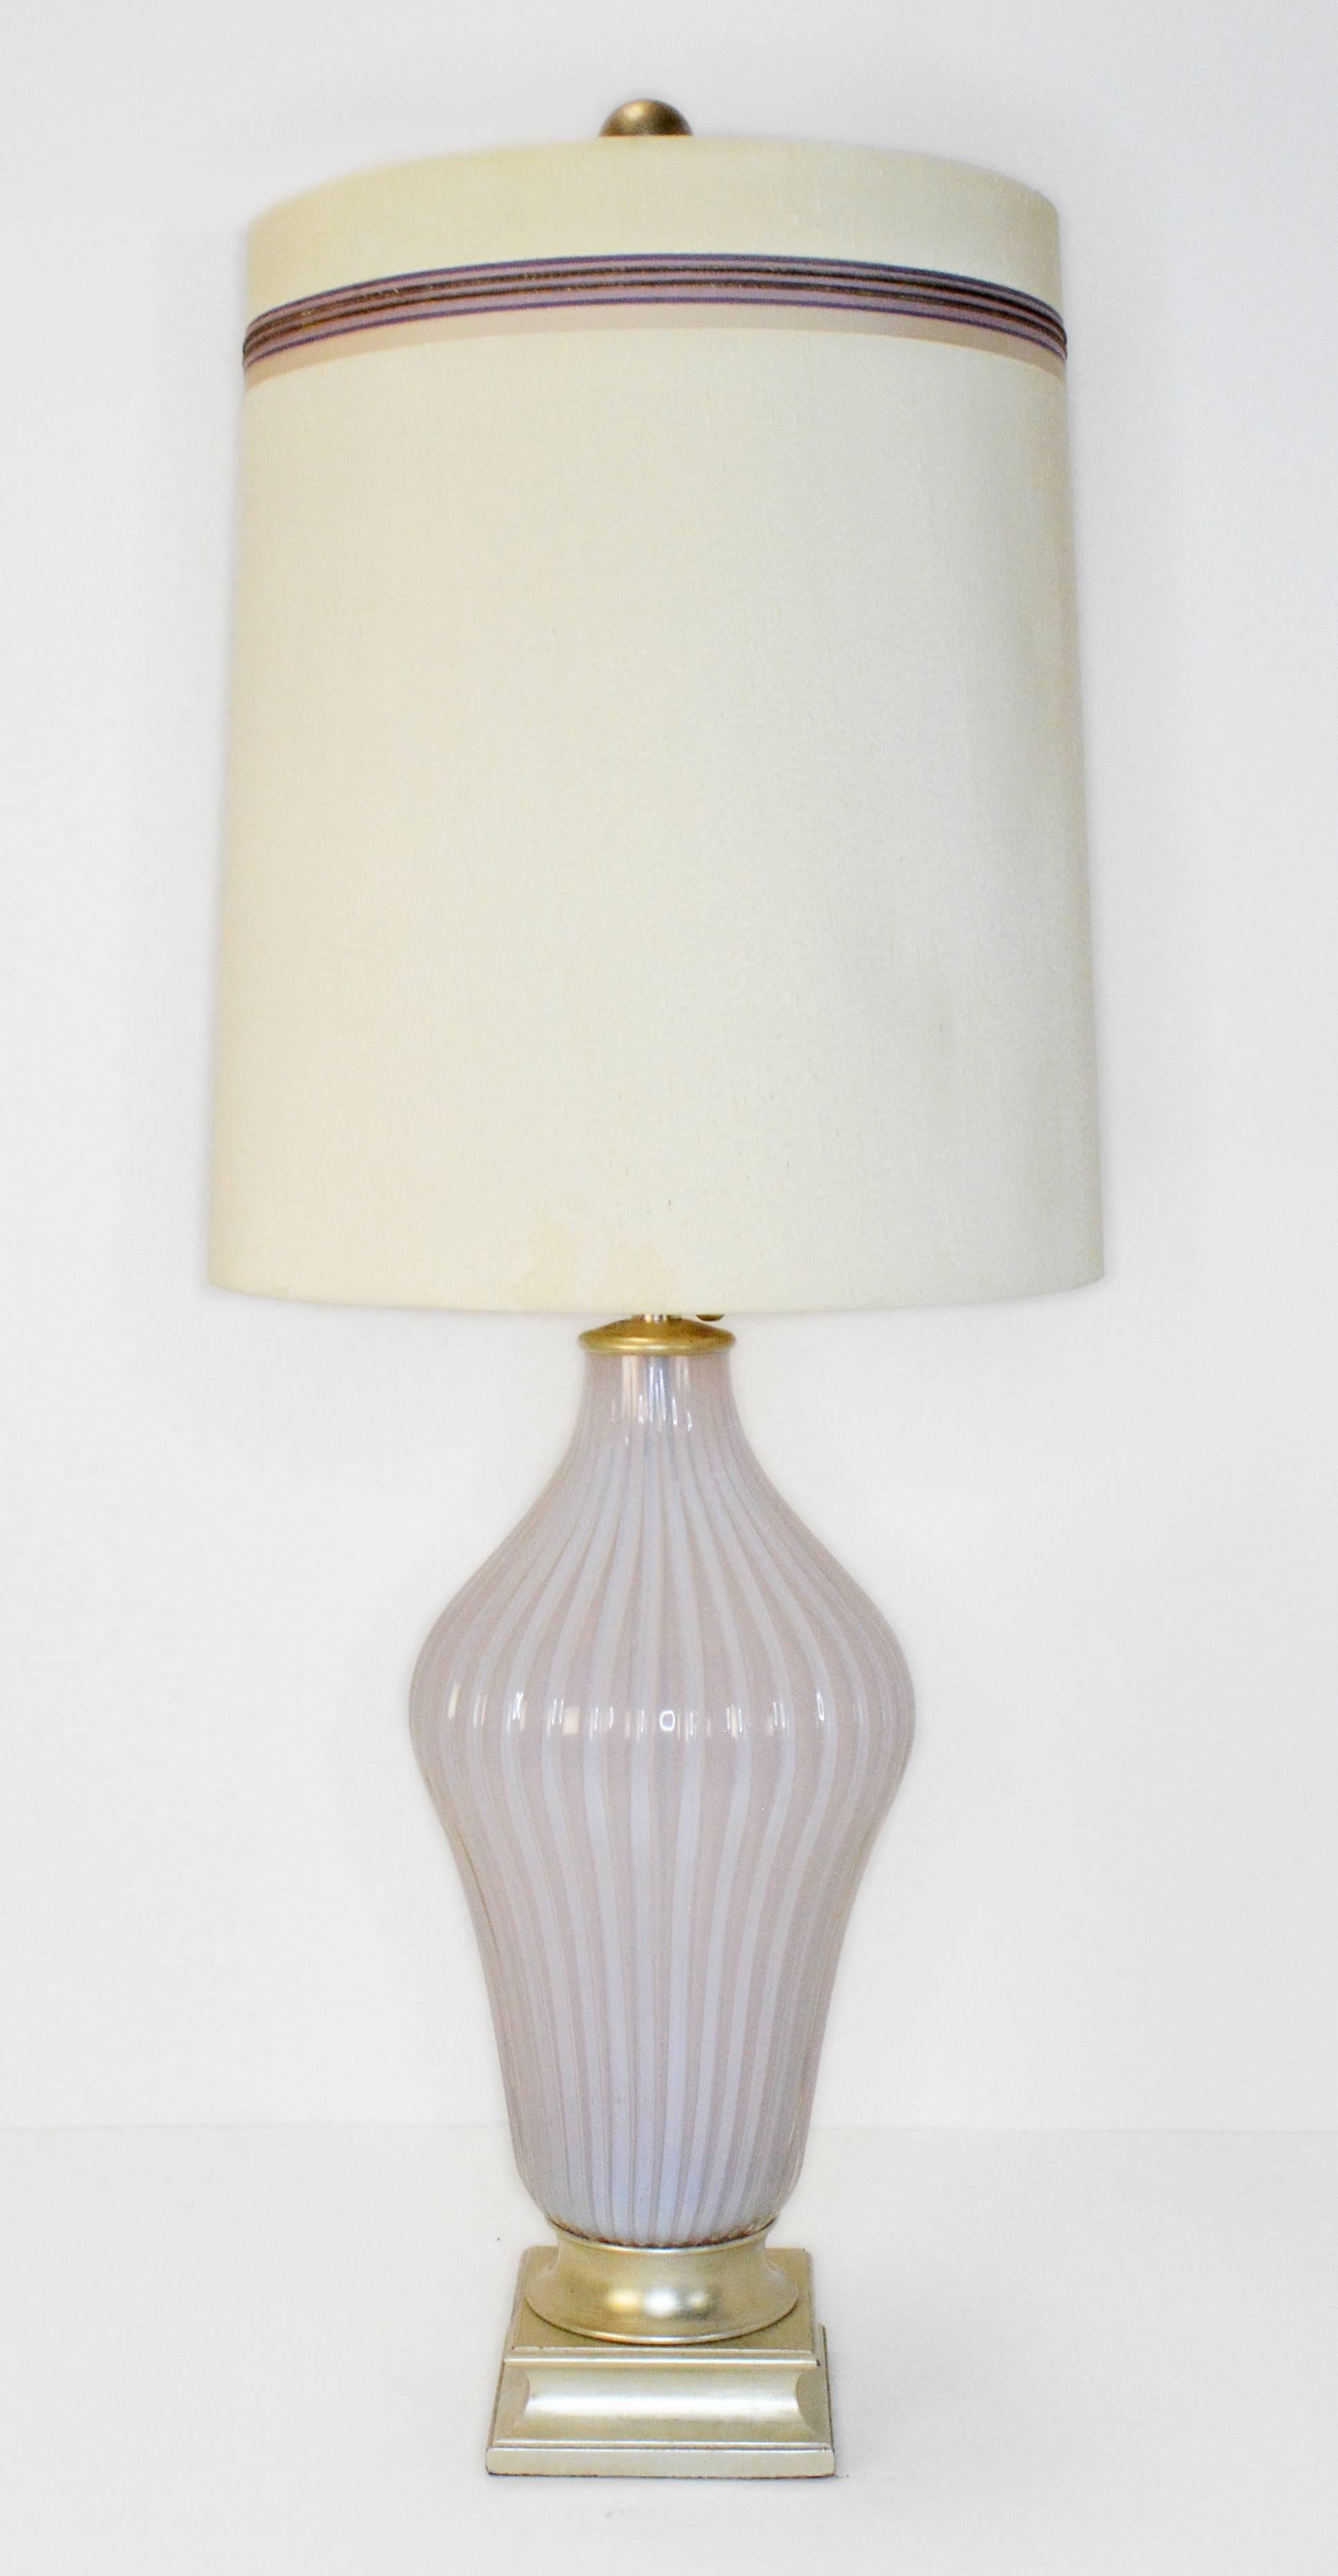 A rare pair of vintage Murano table lamps by Seguso for Marbro. Ribbed Murano opaline glass lamps in a light blush pink retailed by The Marbro Lamp Company on original silver leafed bases. The soft glow of the opaline glass is amazing. Lamps have